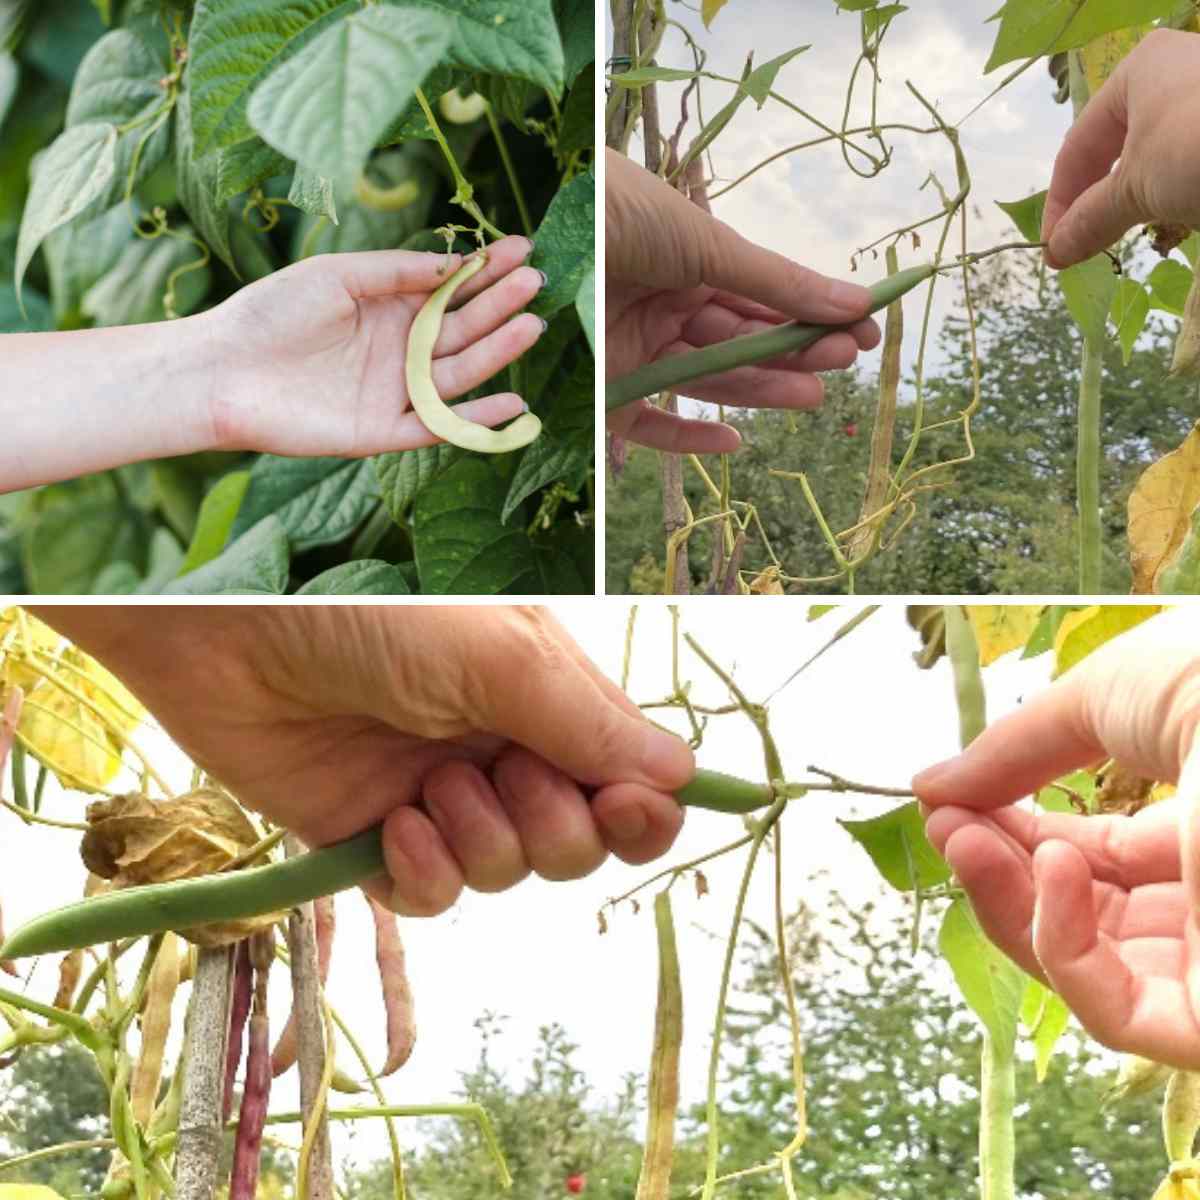 Three images on a grid, a hand finding a curled runner bean, and two images of hands pulling French beans apart to show how you snap a bean away from the plant, as part of a blog about picking green beans with kids